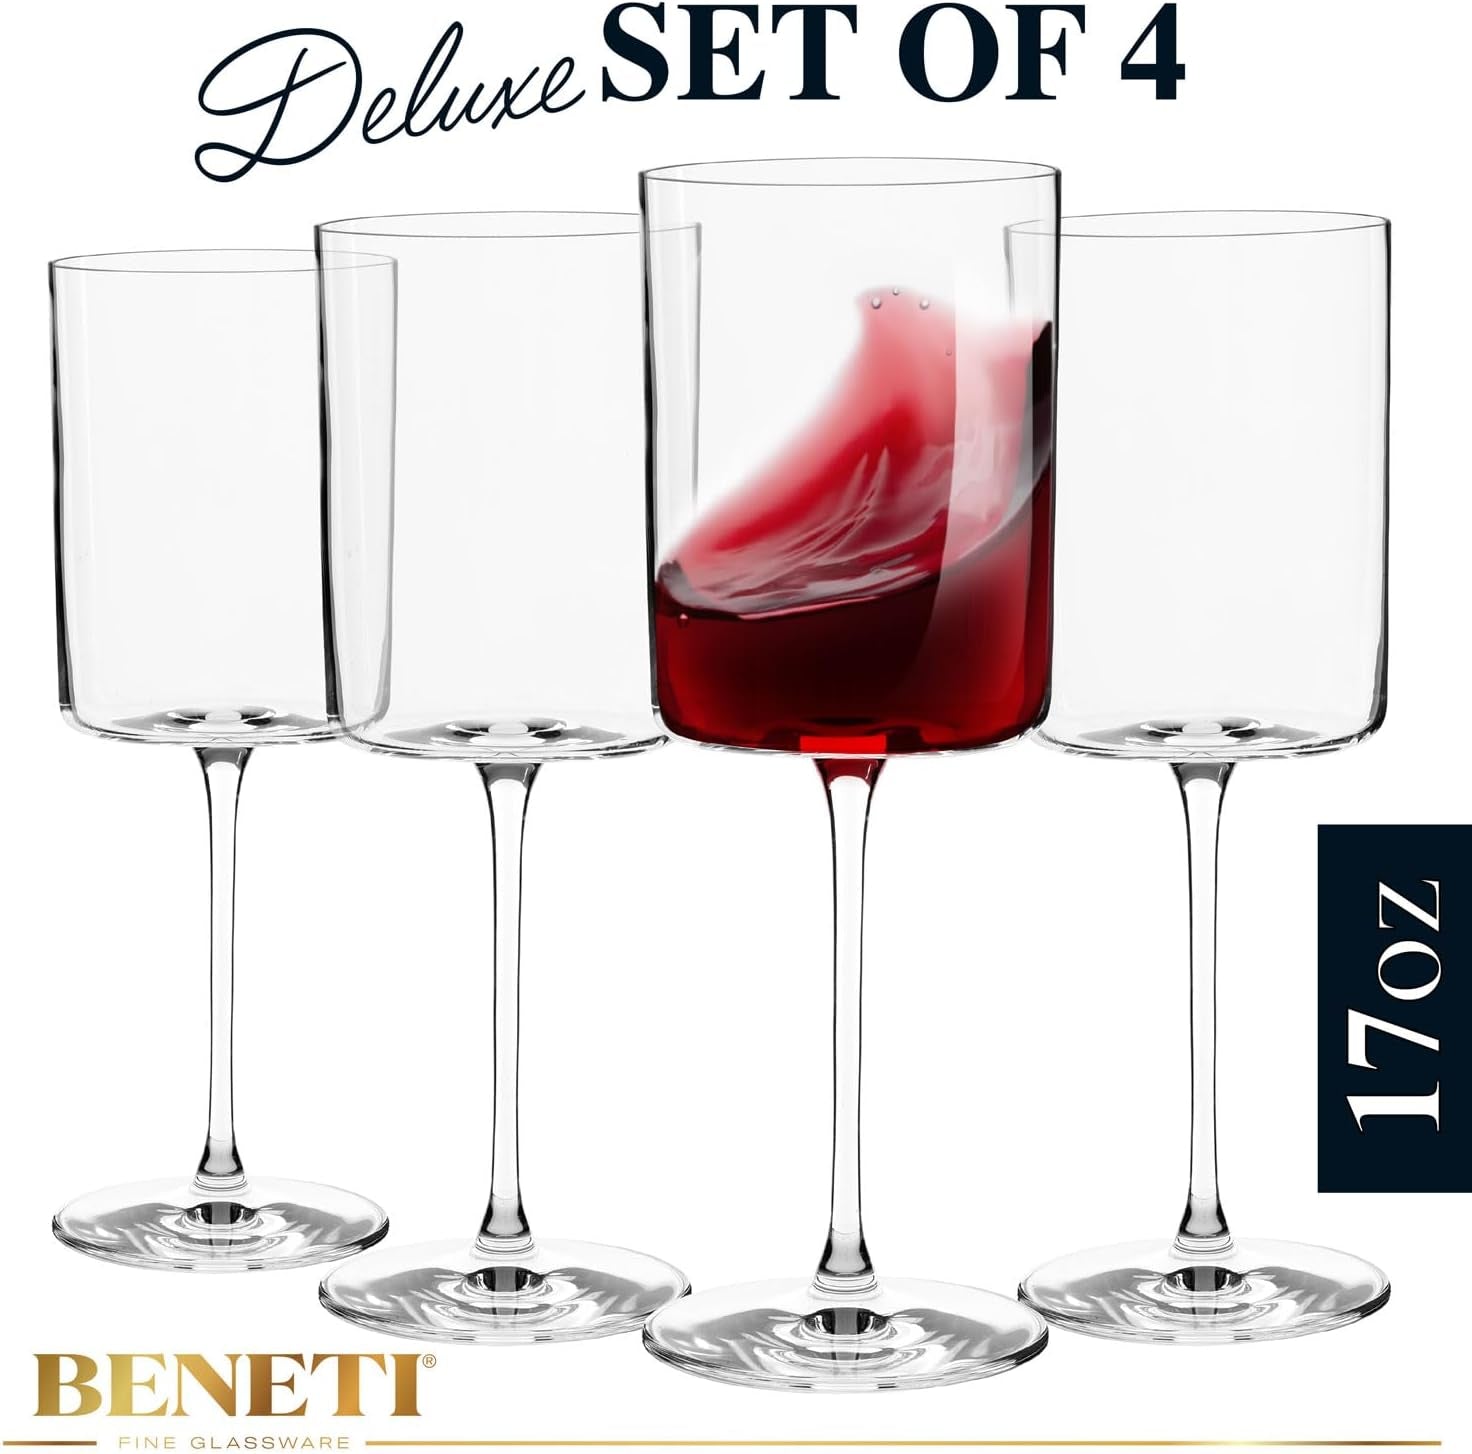 Superlative Edge Wine Glasses Square [Set of 4] White & Red Wine Goblets, Premium Clear Glass Bordeaux Wine Glasses Large Bowl Stemware Wine Blown Glasses Nice Packaging [14 Ounce]